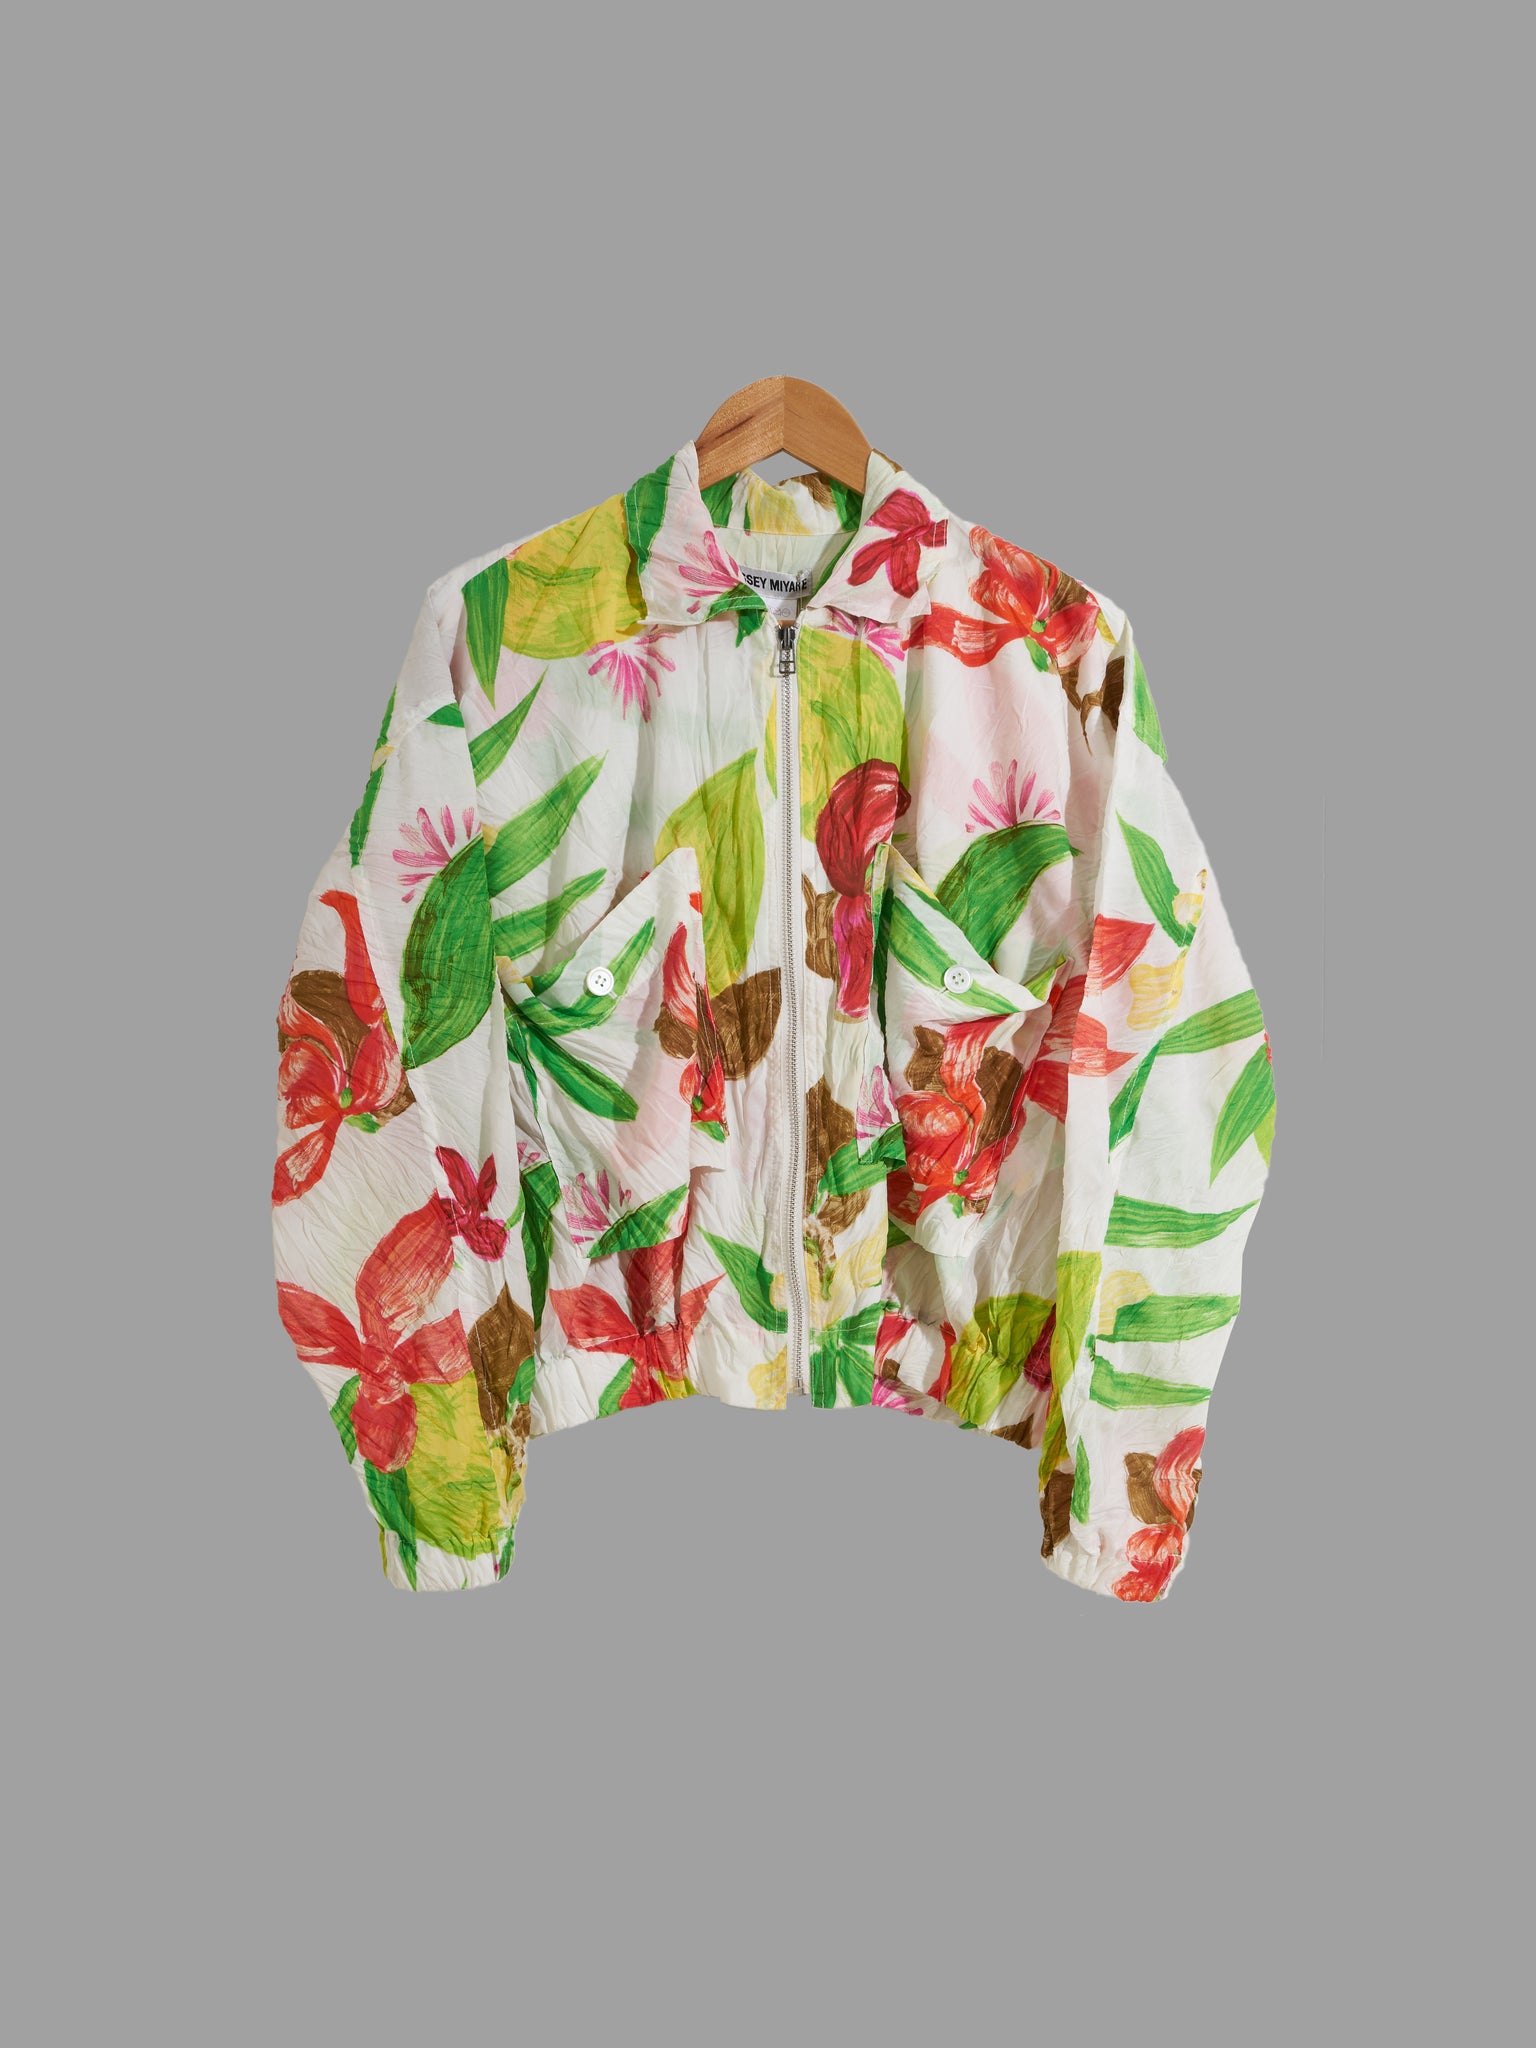 Issey Miyake 1990s white creased polyester floral print bomber jacket - mens M L